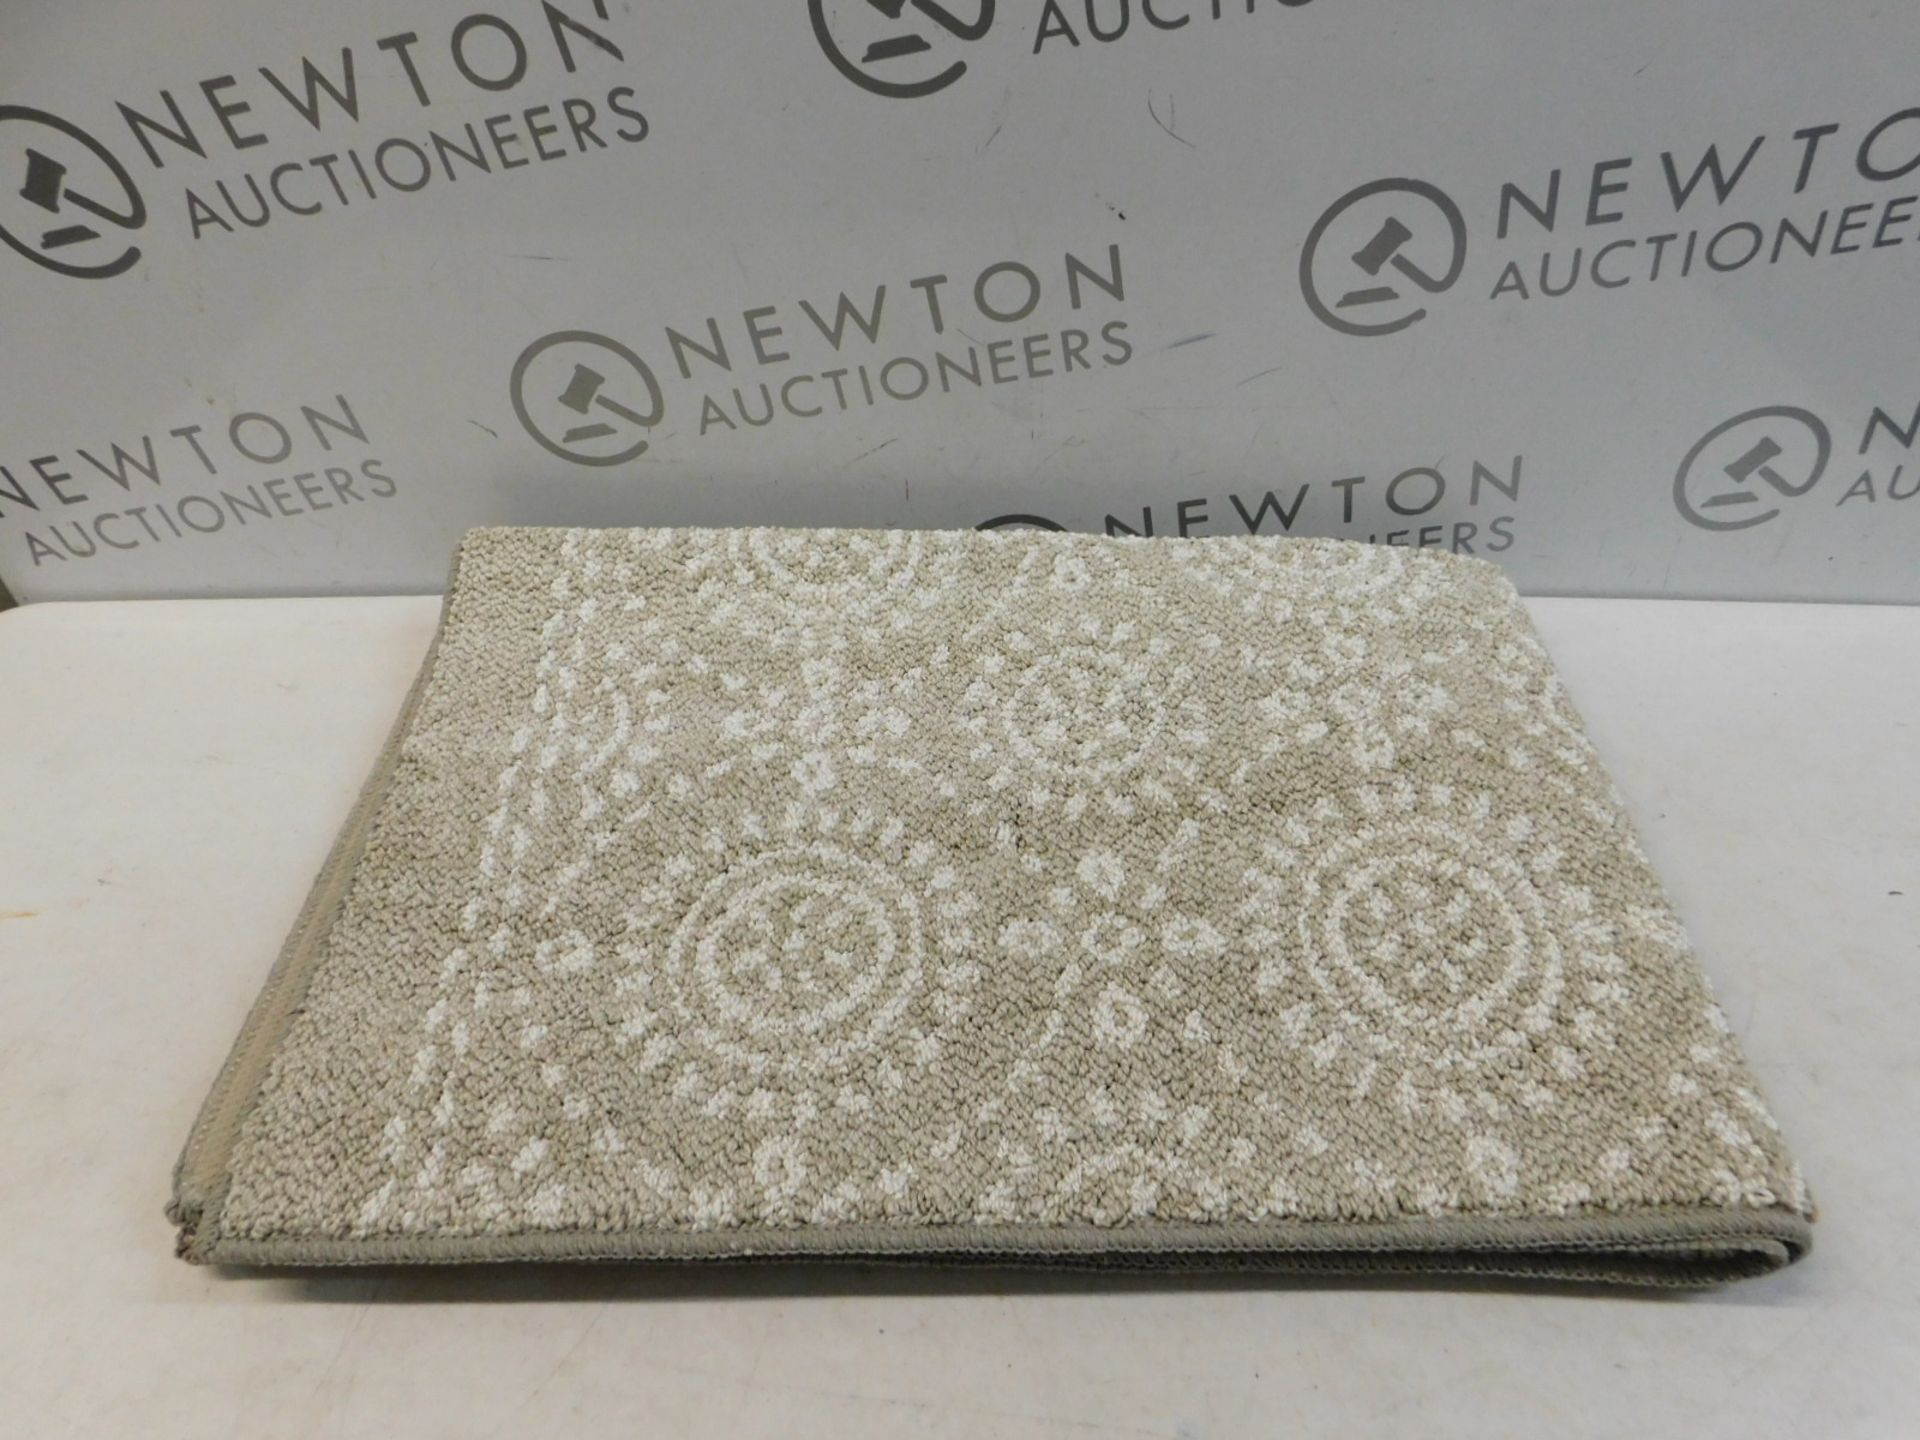 1 NEW GENERATION BEIGE & CREAM PATTERNED ACCENT RUG 30"x 45" RRP Â£44.99